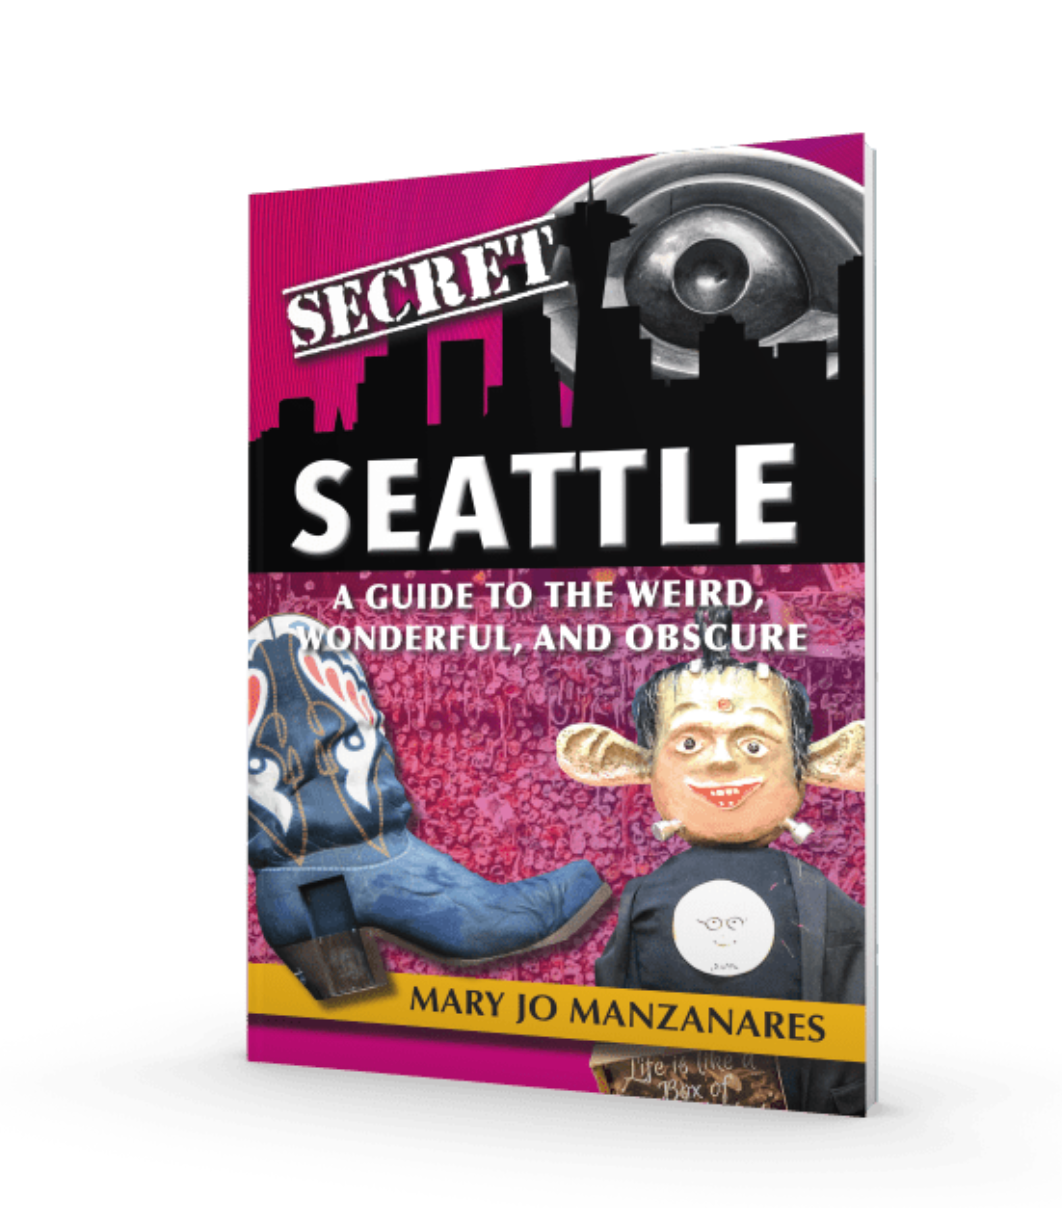 Secret Seattle: A Guide to the Weird, Wonderful, and Obscure